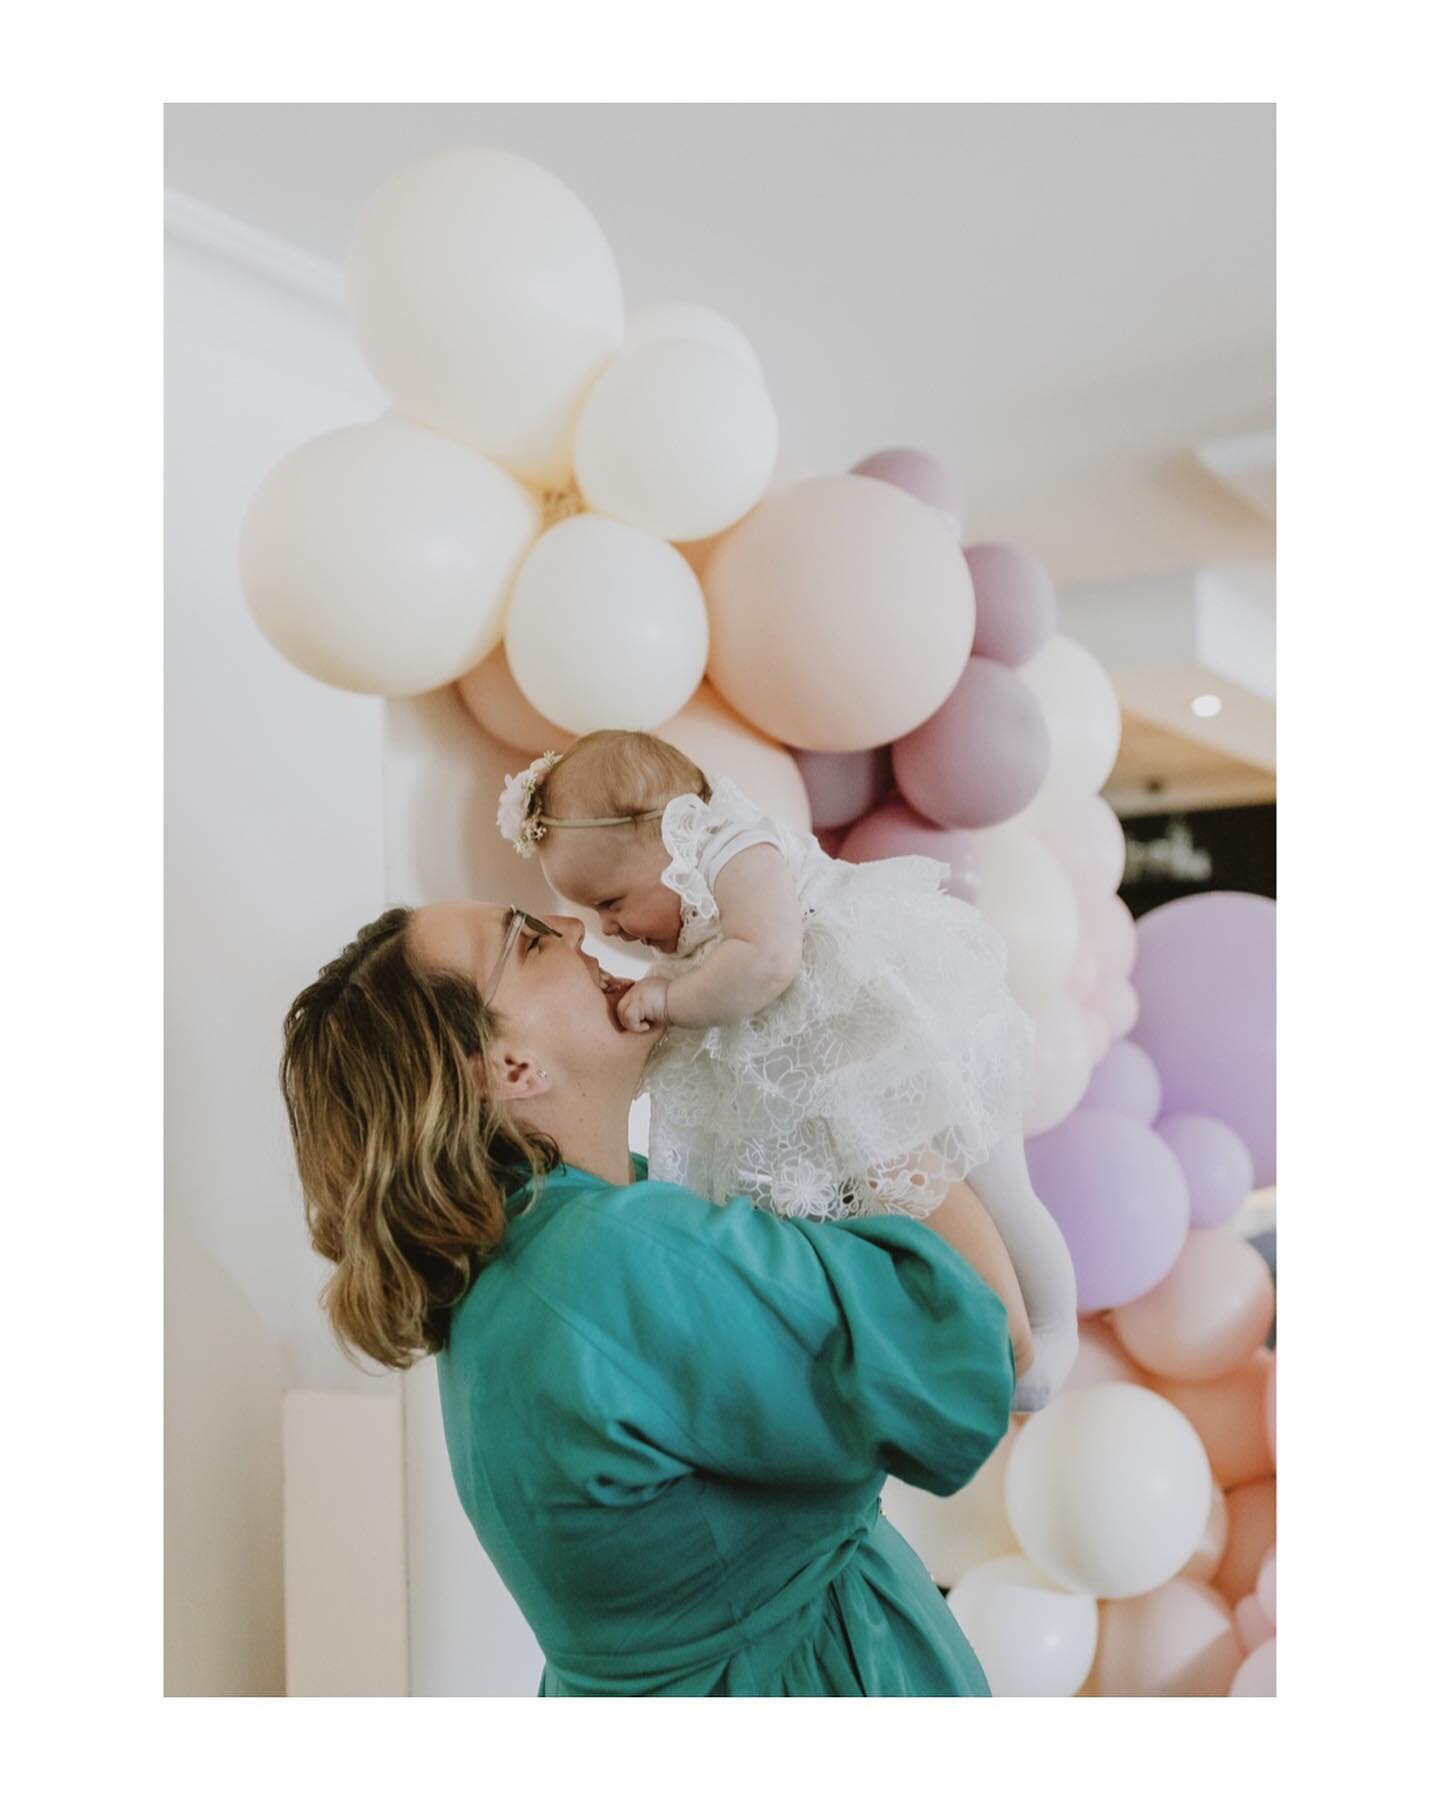 Isla&rsquo;s Christening❤️ I love capturing Christenings. All the love from everyone is so heart warming! Thanks for having me on this special occasion. 
Venue: @themanorgoldcreek 
Backdrops and Balloons: @tinycreaturesco 
Cake: @_____keik_____ 
Flow